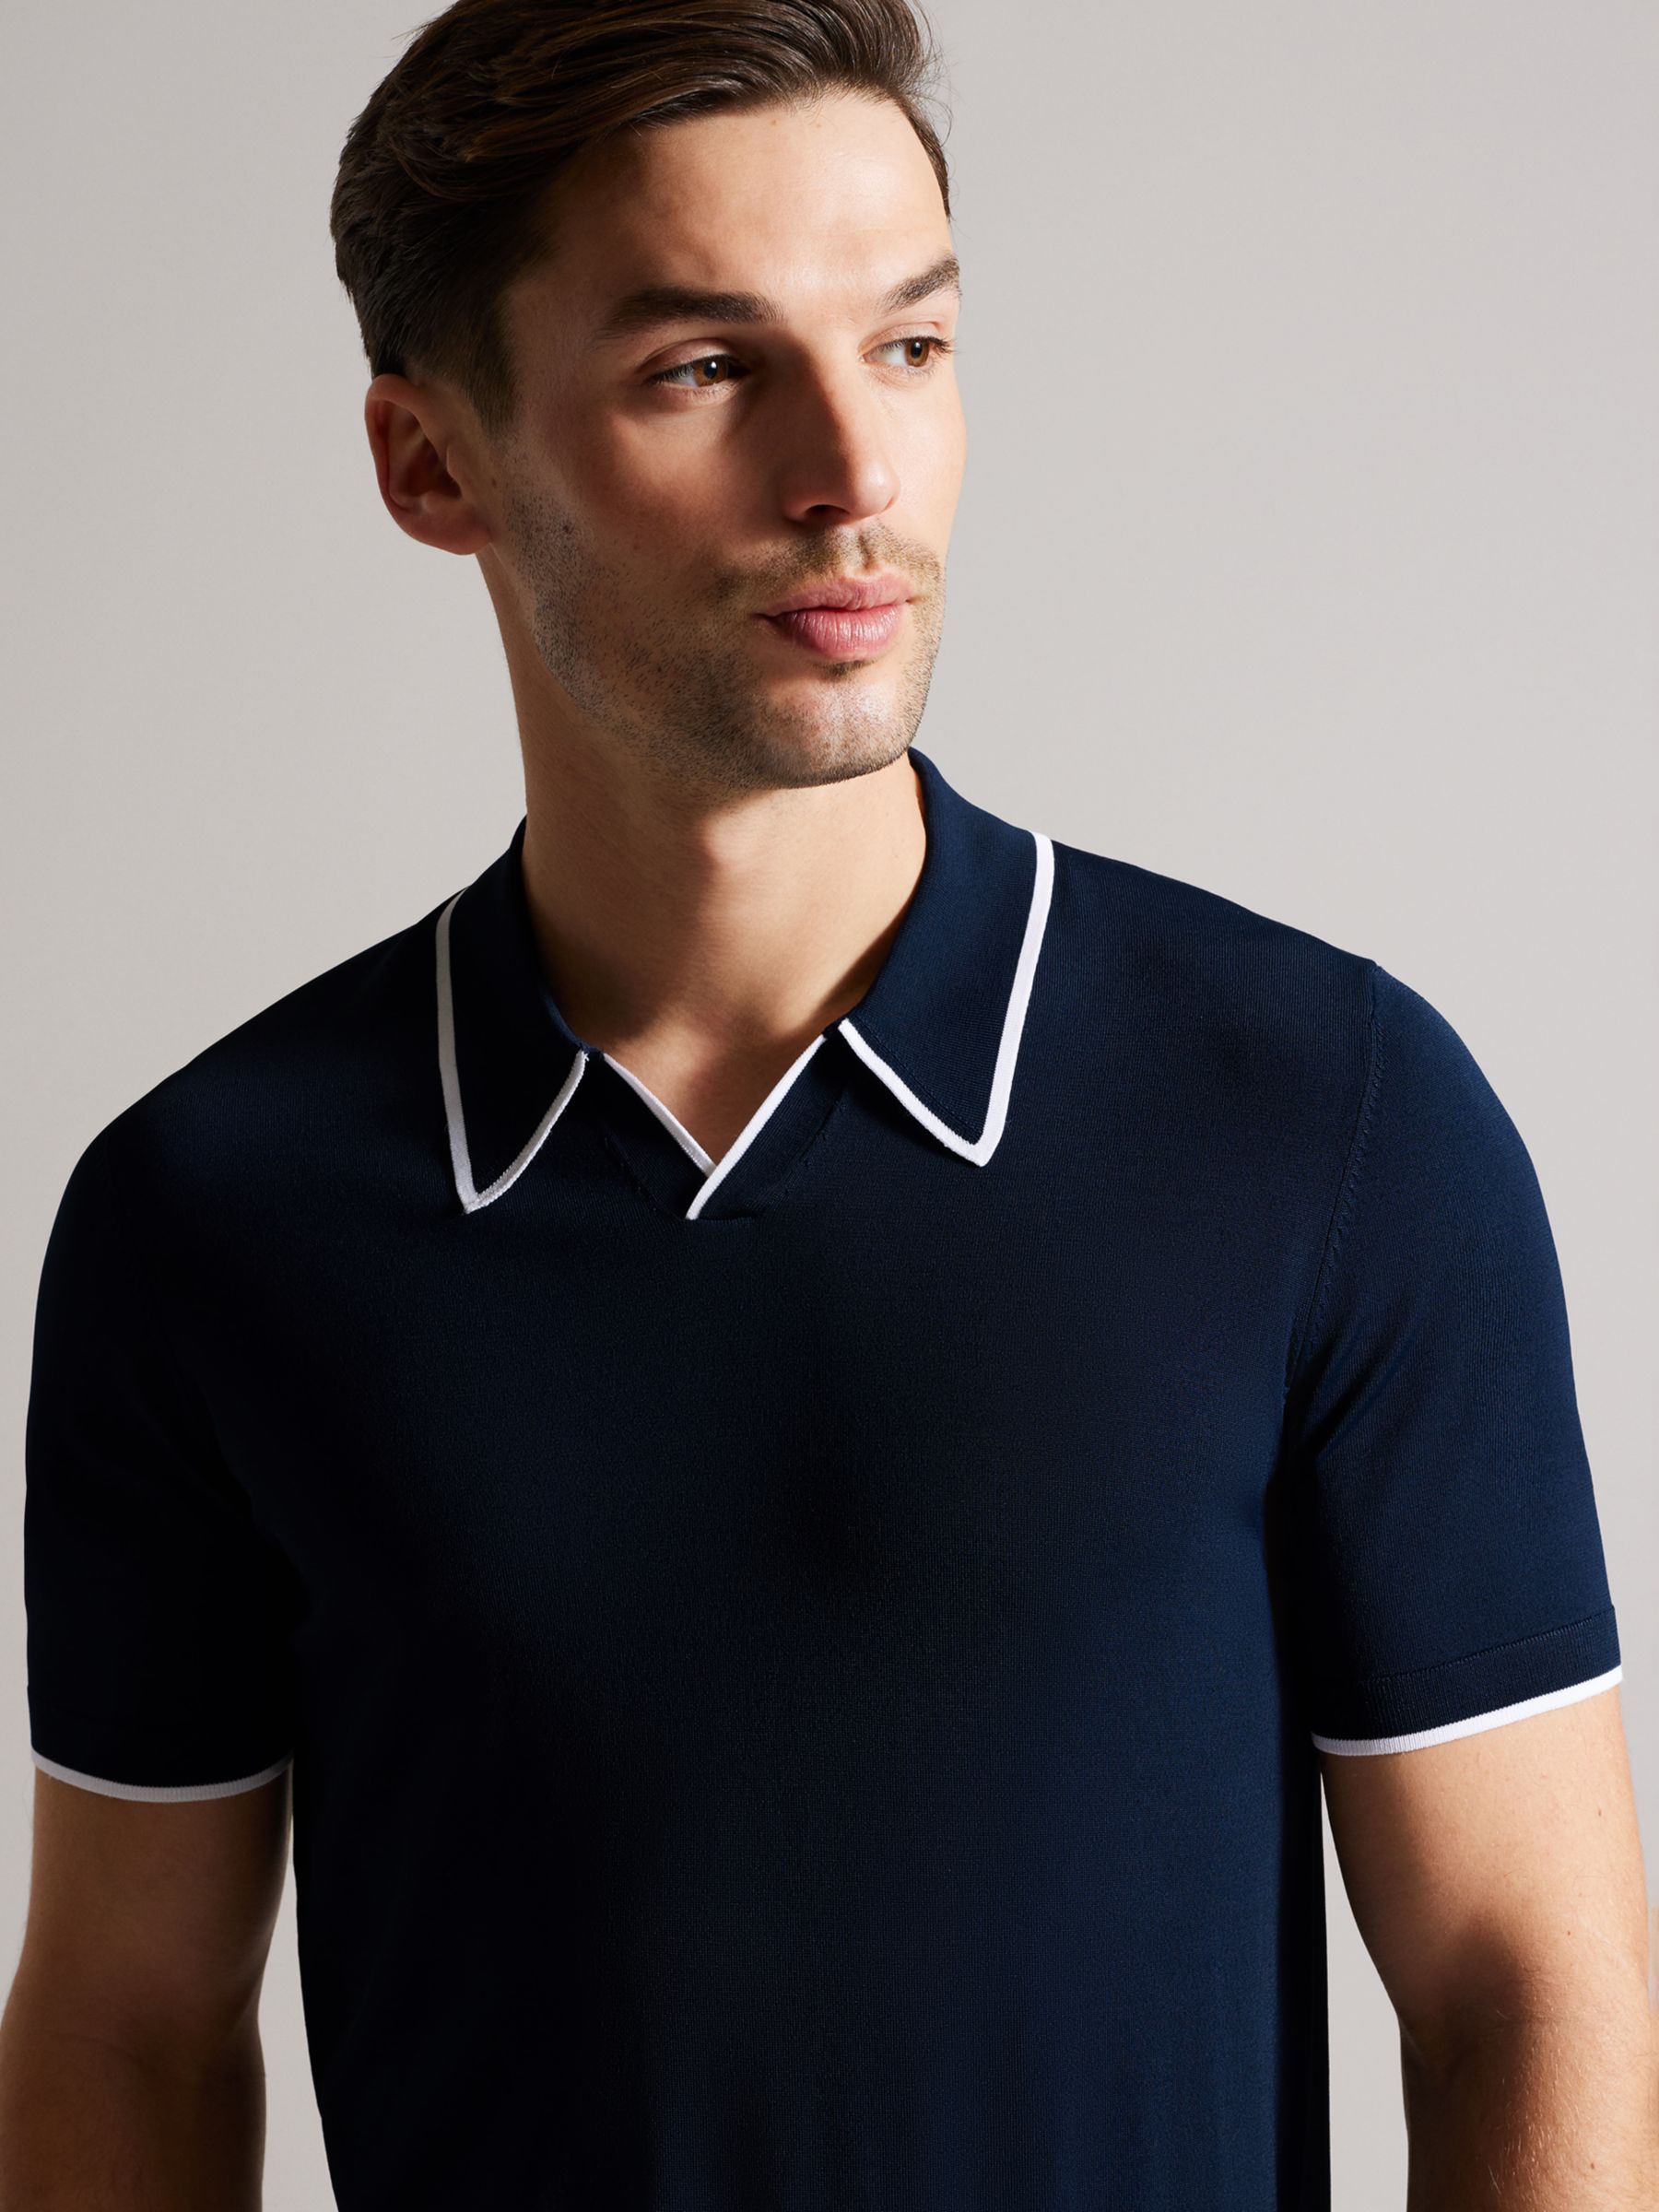 Ted Baker Stortfo Knit Polo Top, Navy, L